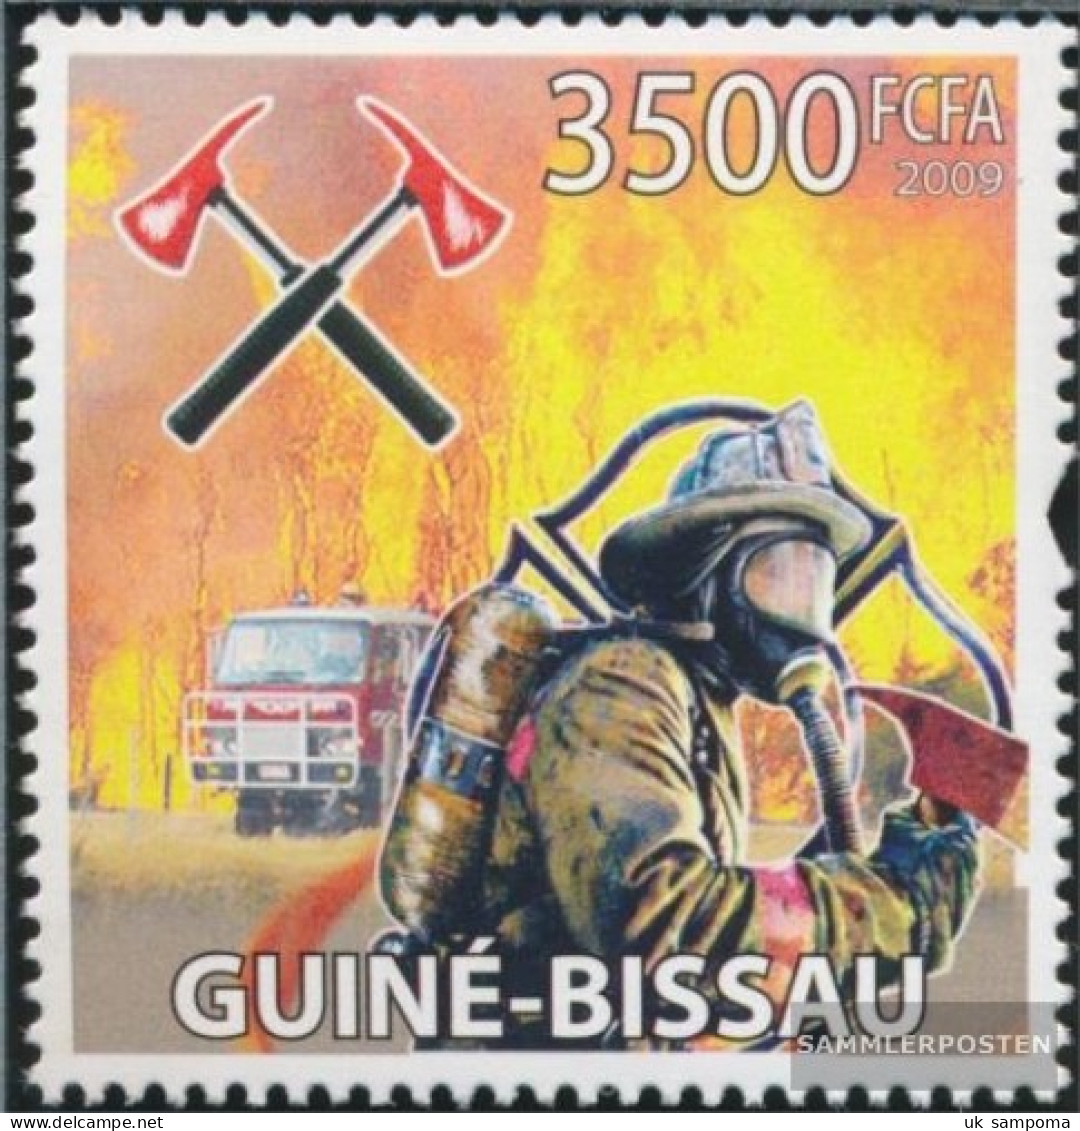 Guinea-Bissau 4407 (complete. Issue) Unmounted Mint / Never Hinged 2009 Fire - Guinea-Bissau